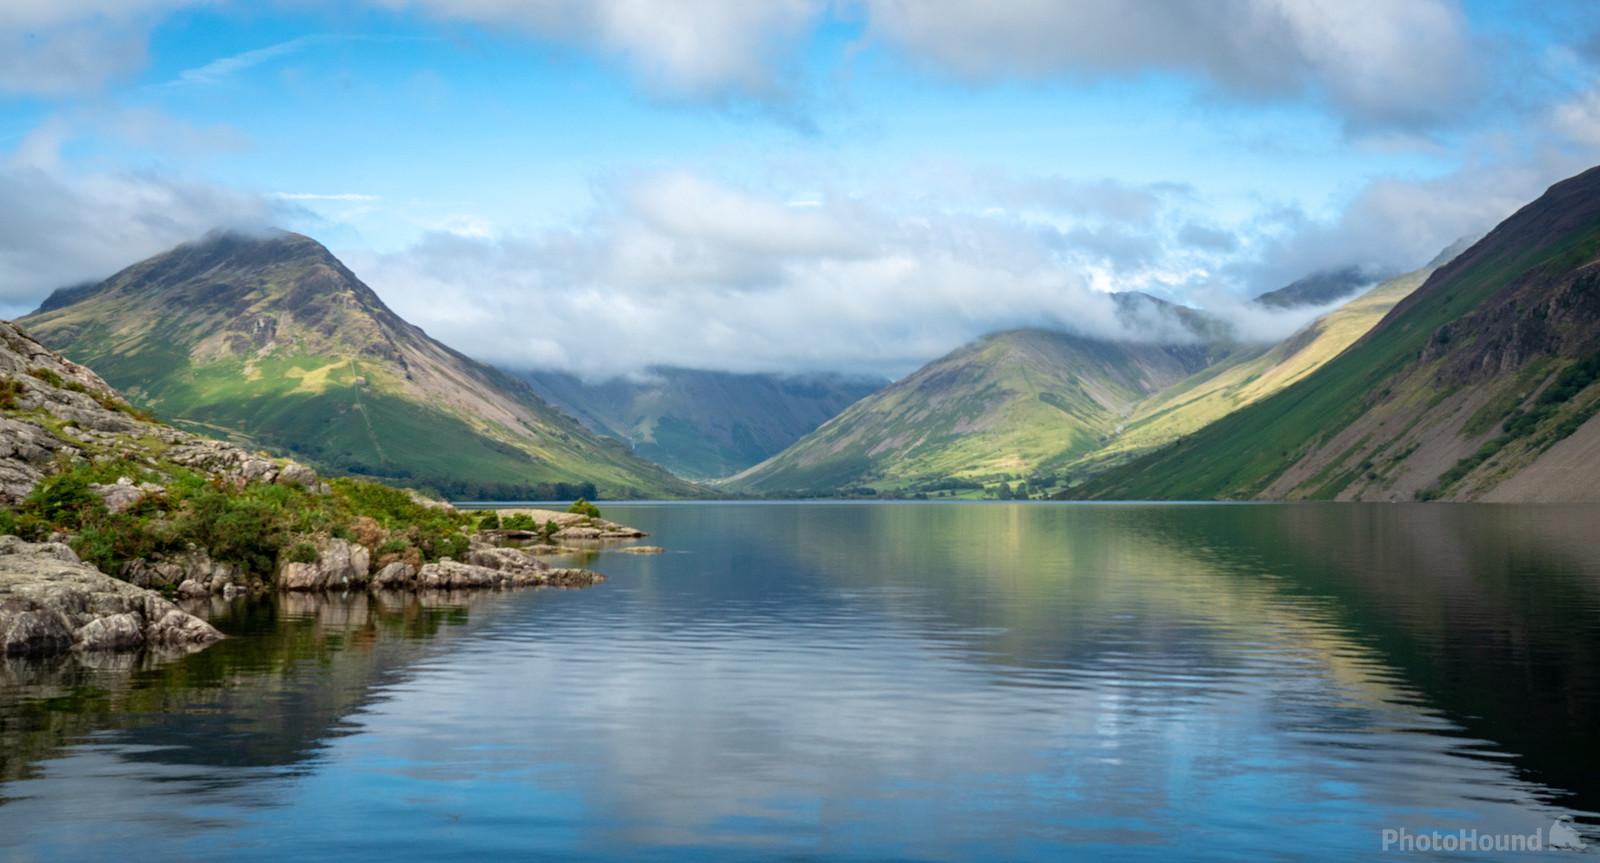 Image of Wast Water, Lake District by Richard Lizzimore